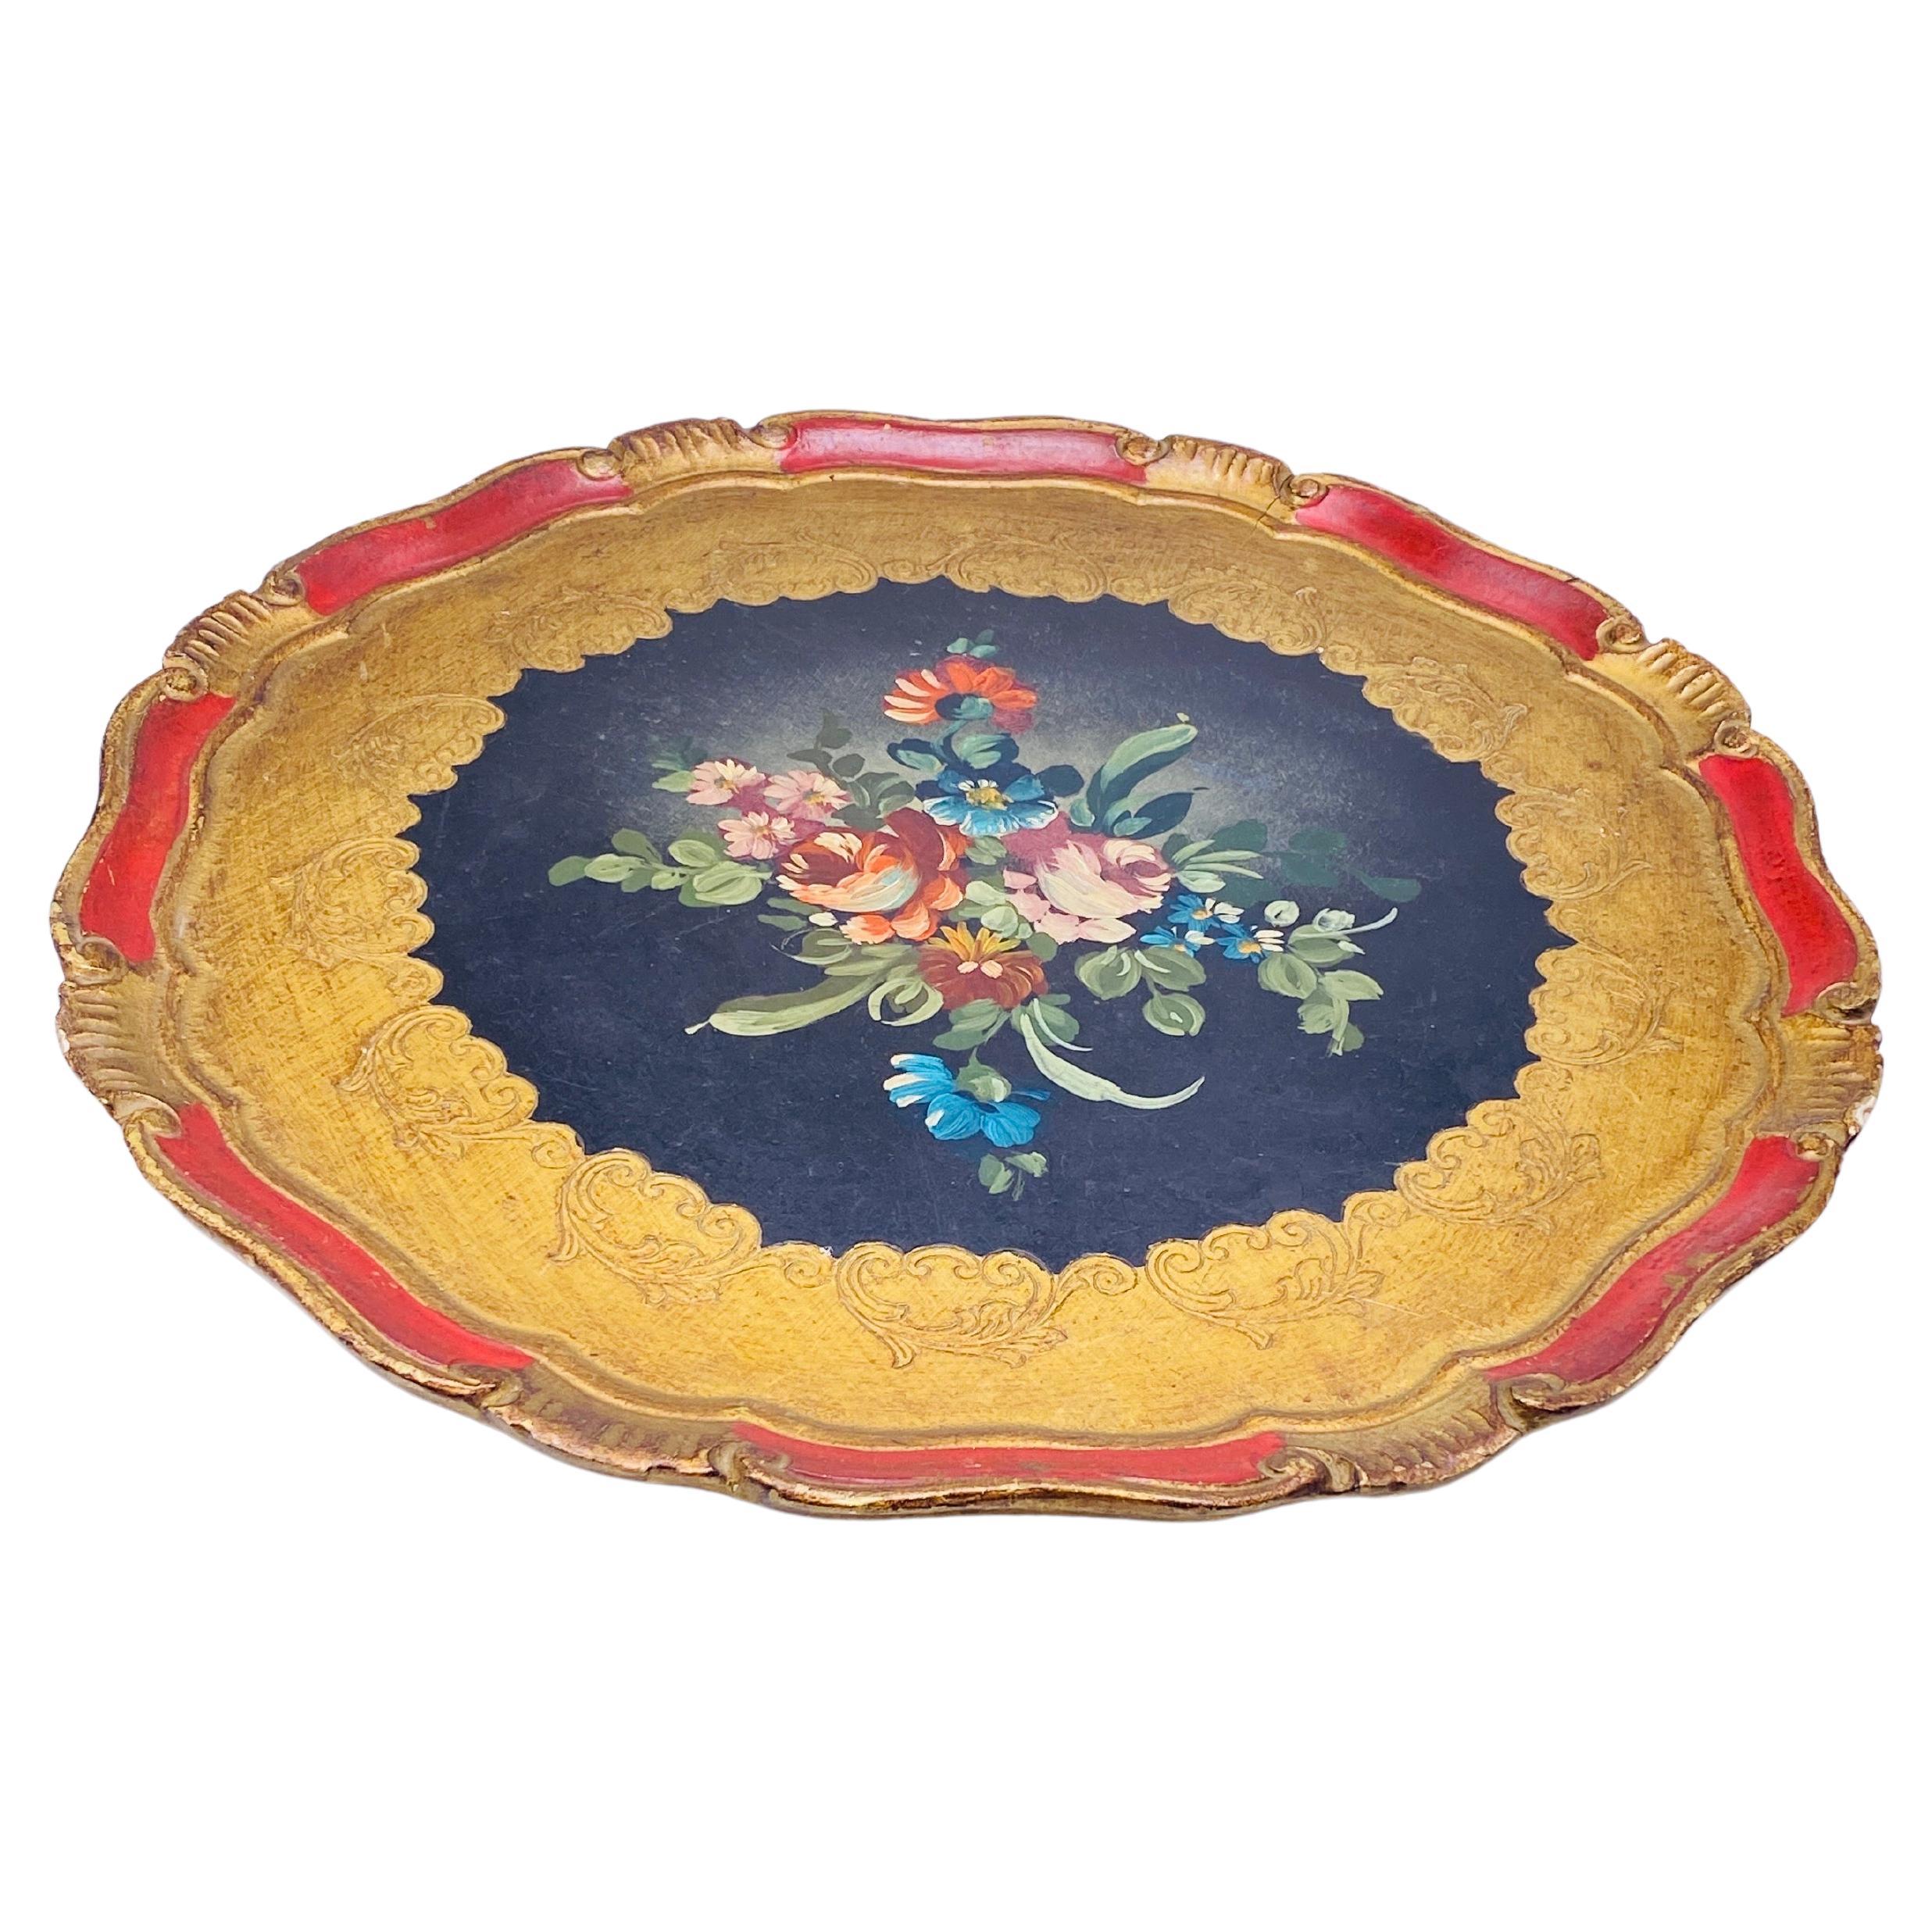 Wood Florentine Platter, Hand Painted with Floral Decor Patterns, Italy 1960 For Sale